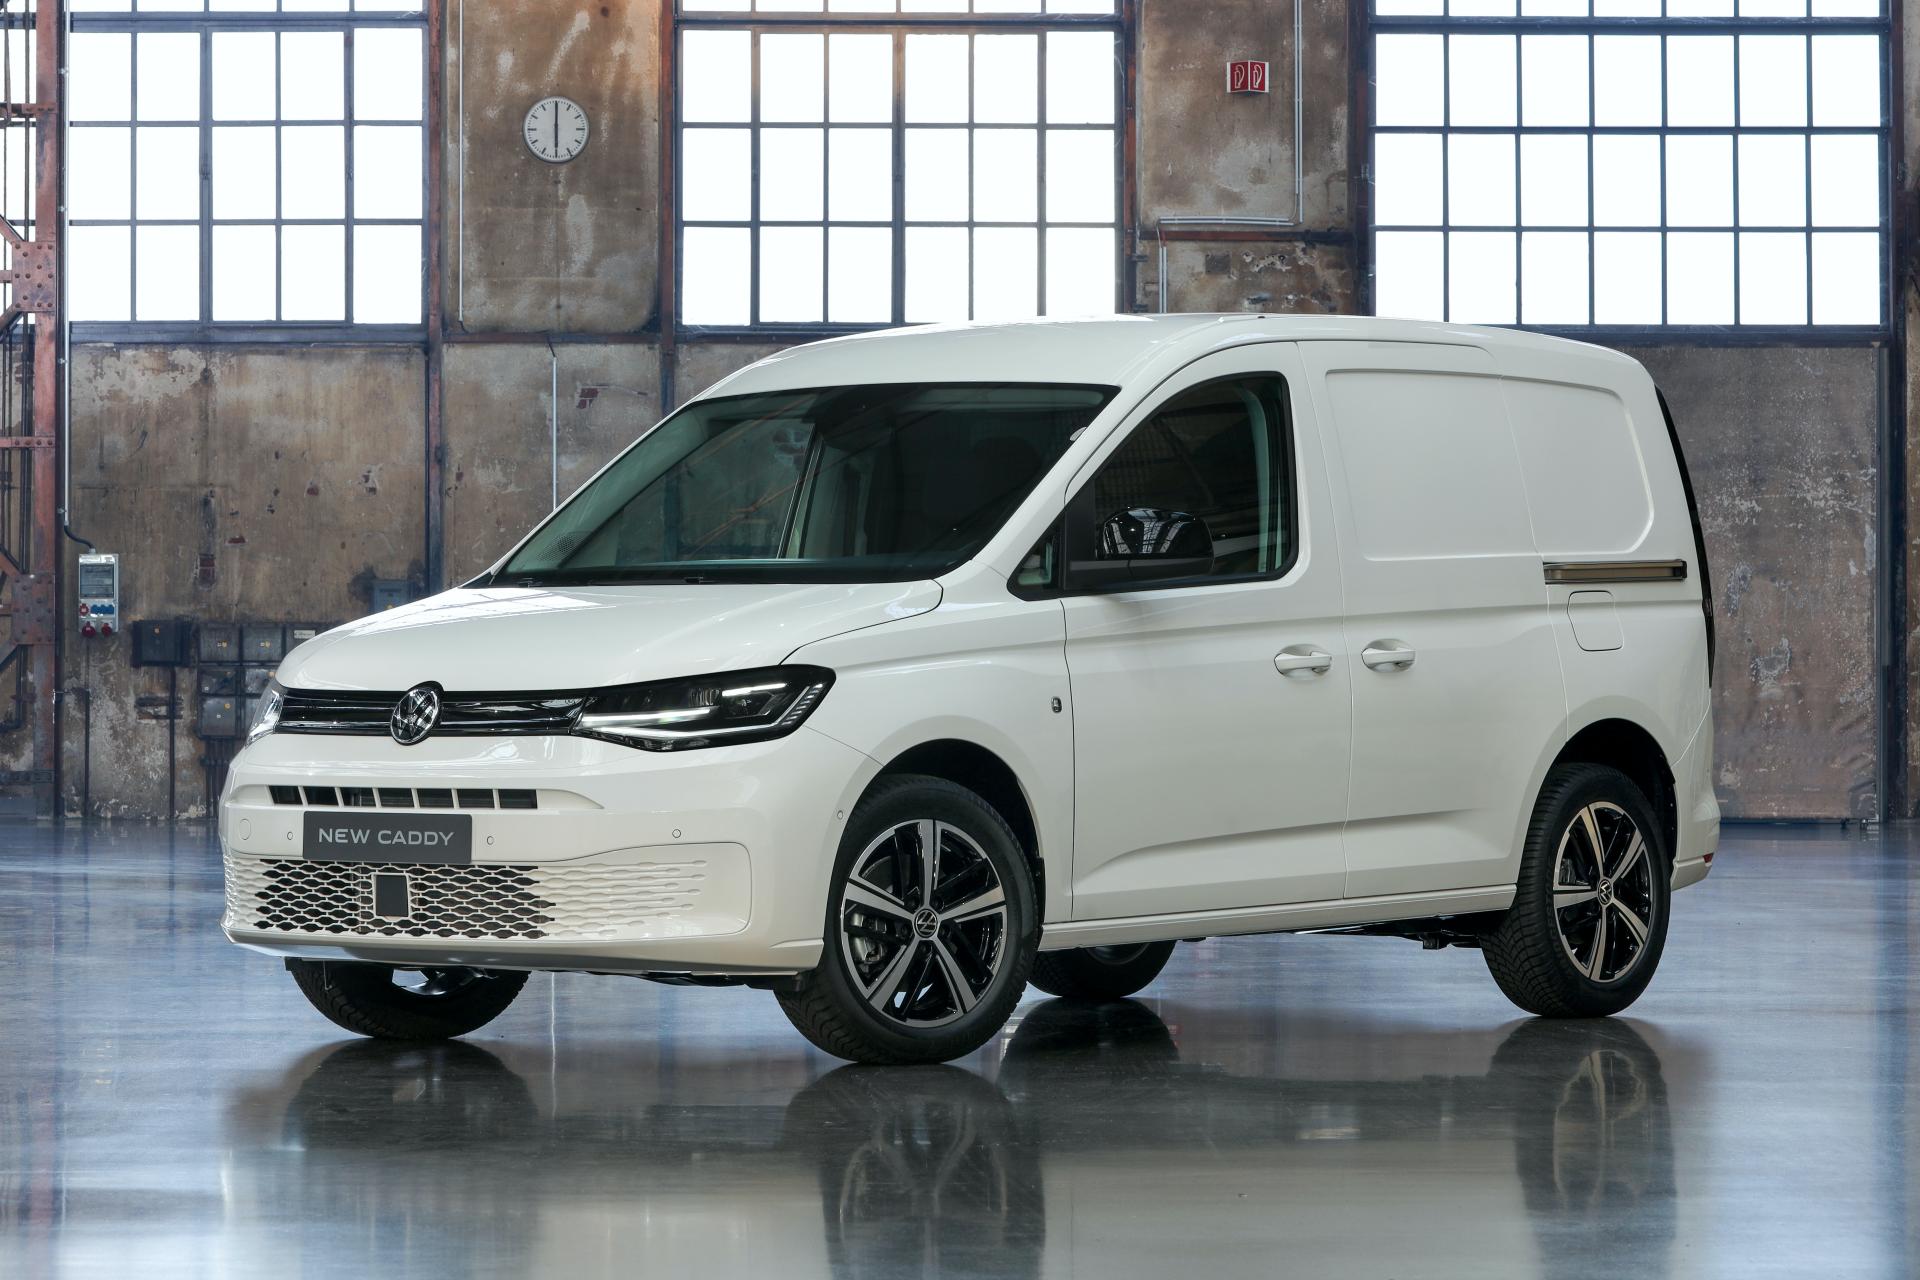 New 2021 VW Caddy Wraps MQB Underpinnings In Evolutionary